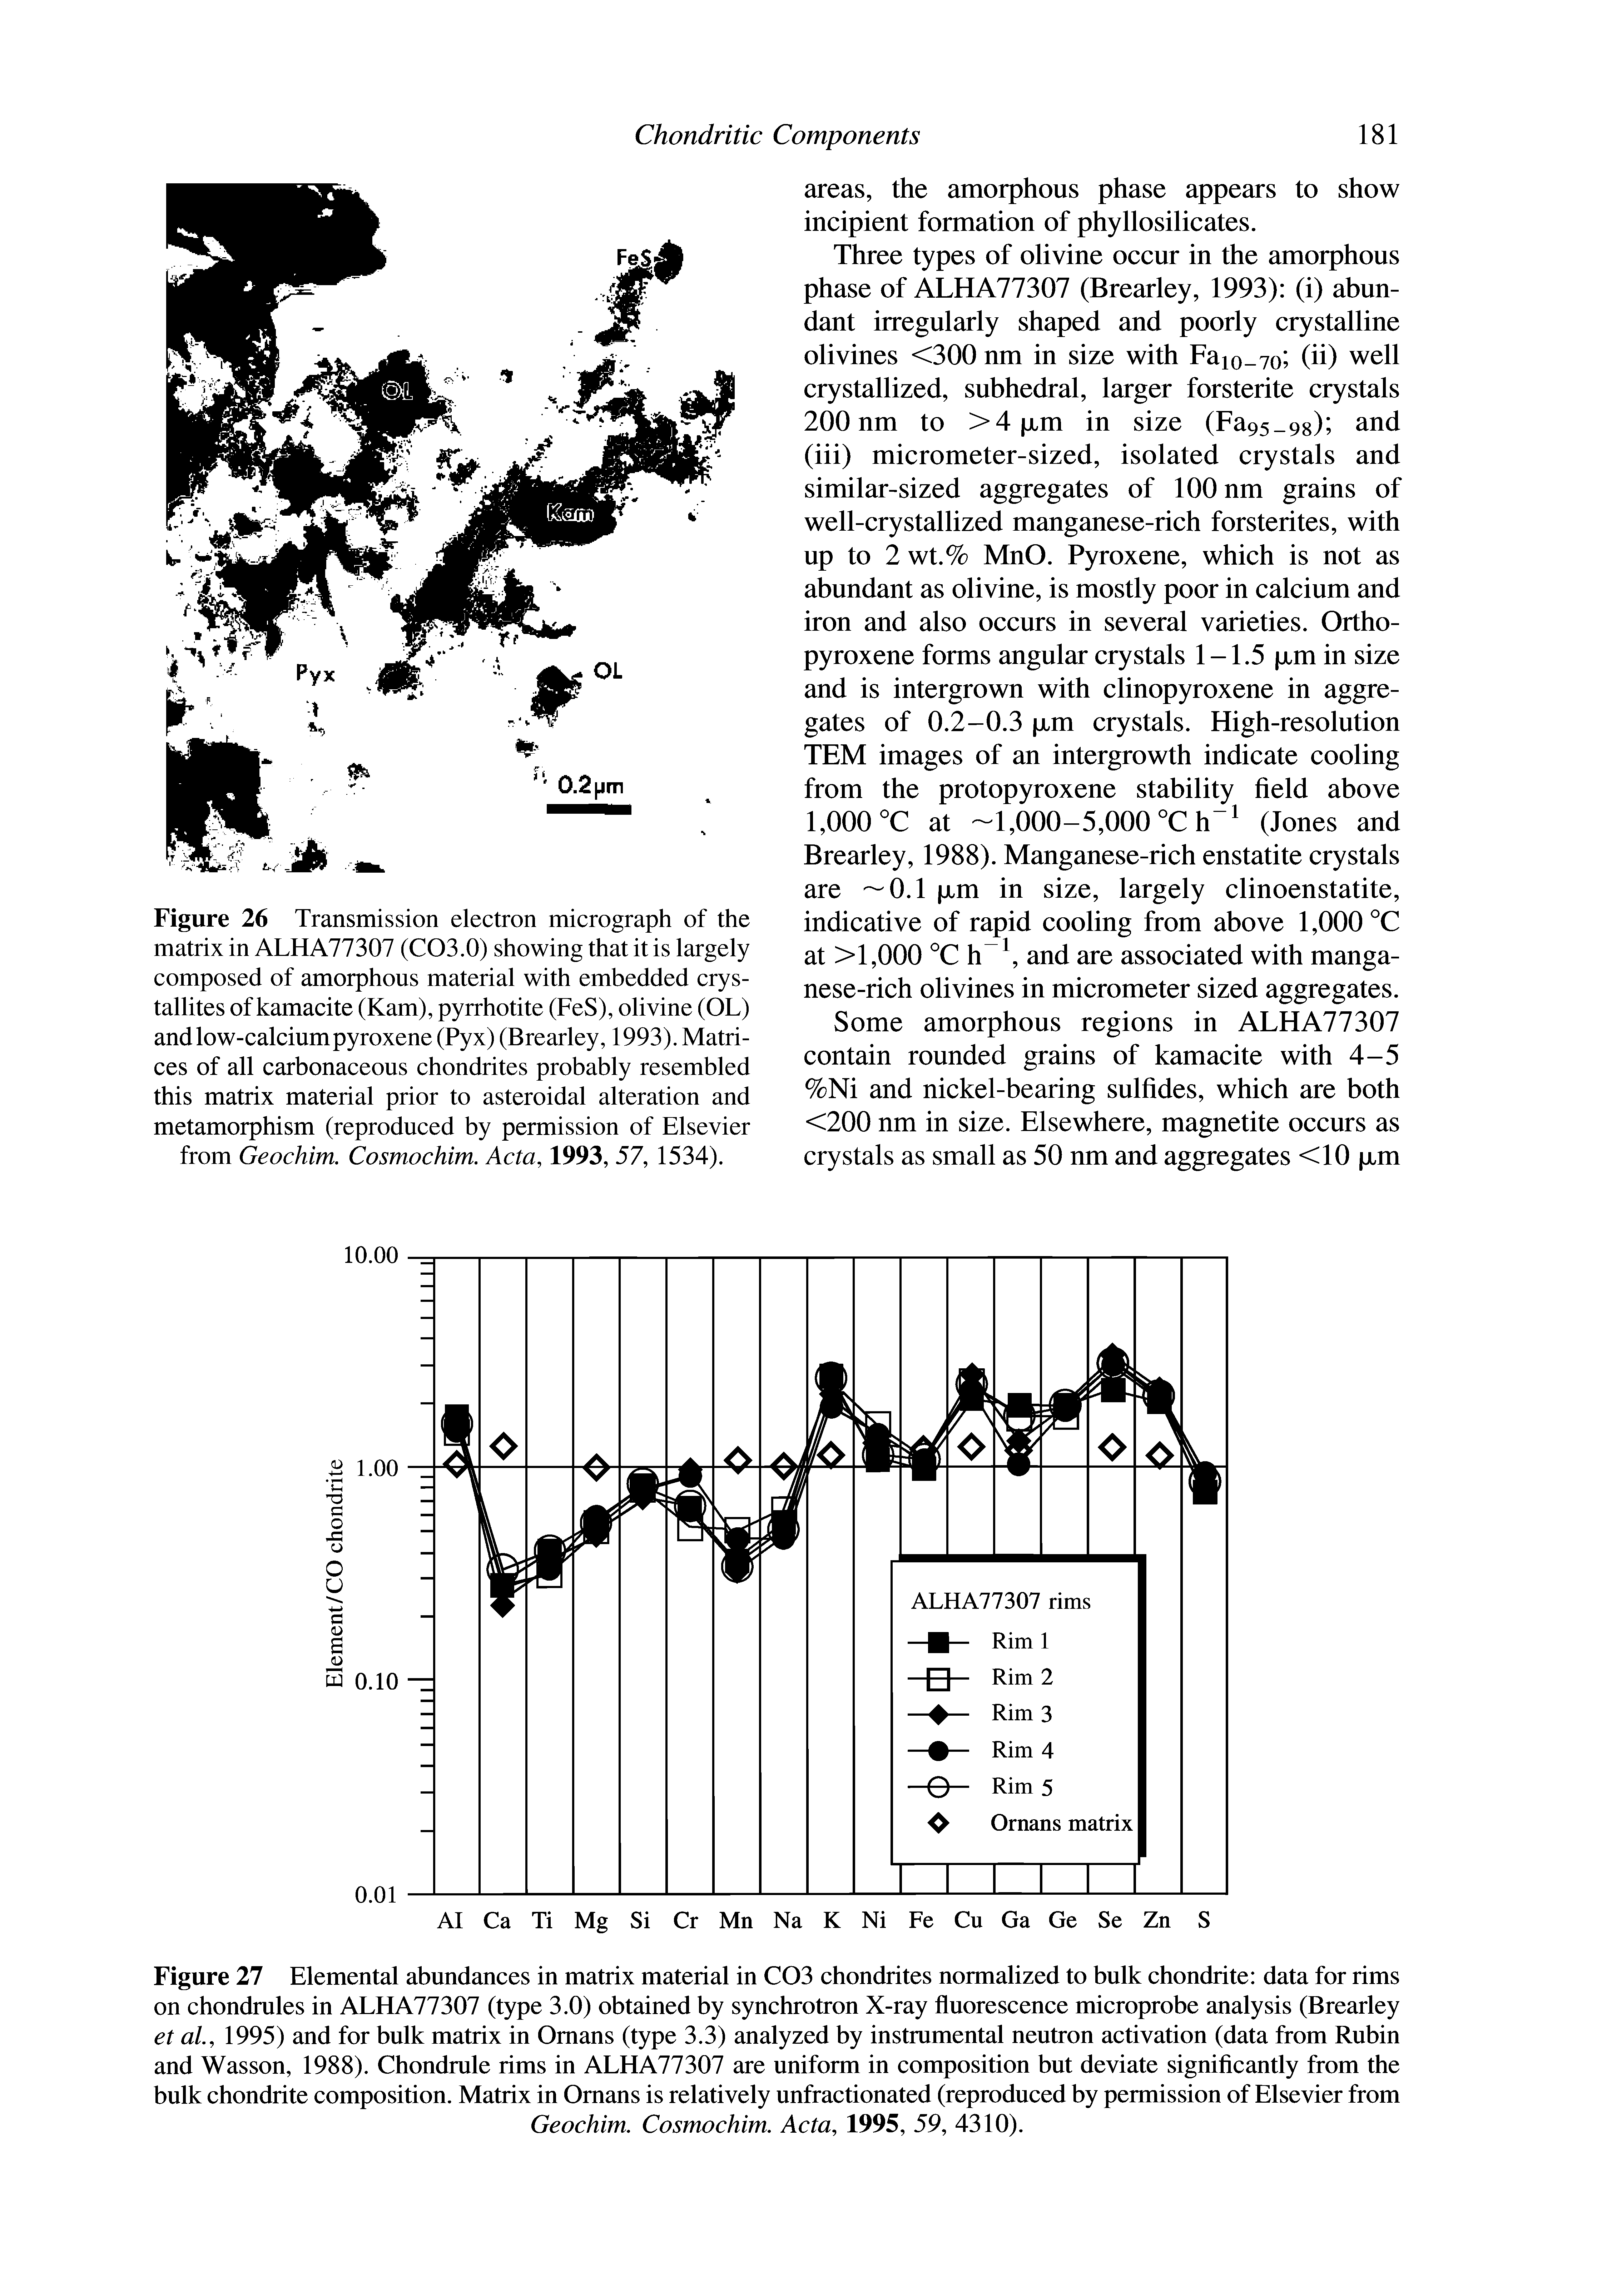 Figure 27 Elemental abundances in matrix material in C03 chondrites normalized to bulk chondrite data for rims on chondrules in ALHA77307 (type 3.0) obtained by synchrotron X-ray fluorescence microprobe analysis (Brearley et aL, 1995) and for bulk matrix in Omans (type 3.3) analyzed by instrumental neutron activation (data from Rubin and Wasson, 1988). Chondrule rims in ALHA77307 are uniform in composition but deviate significantly from the bulk chondrite composition. Matrix in Ornans is relatively unfractionated (reproduced by permission of Elsevier from...